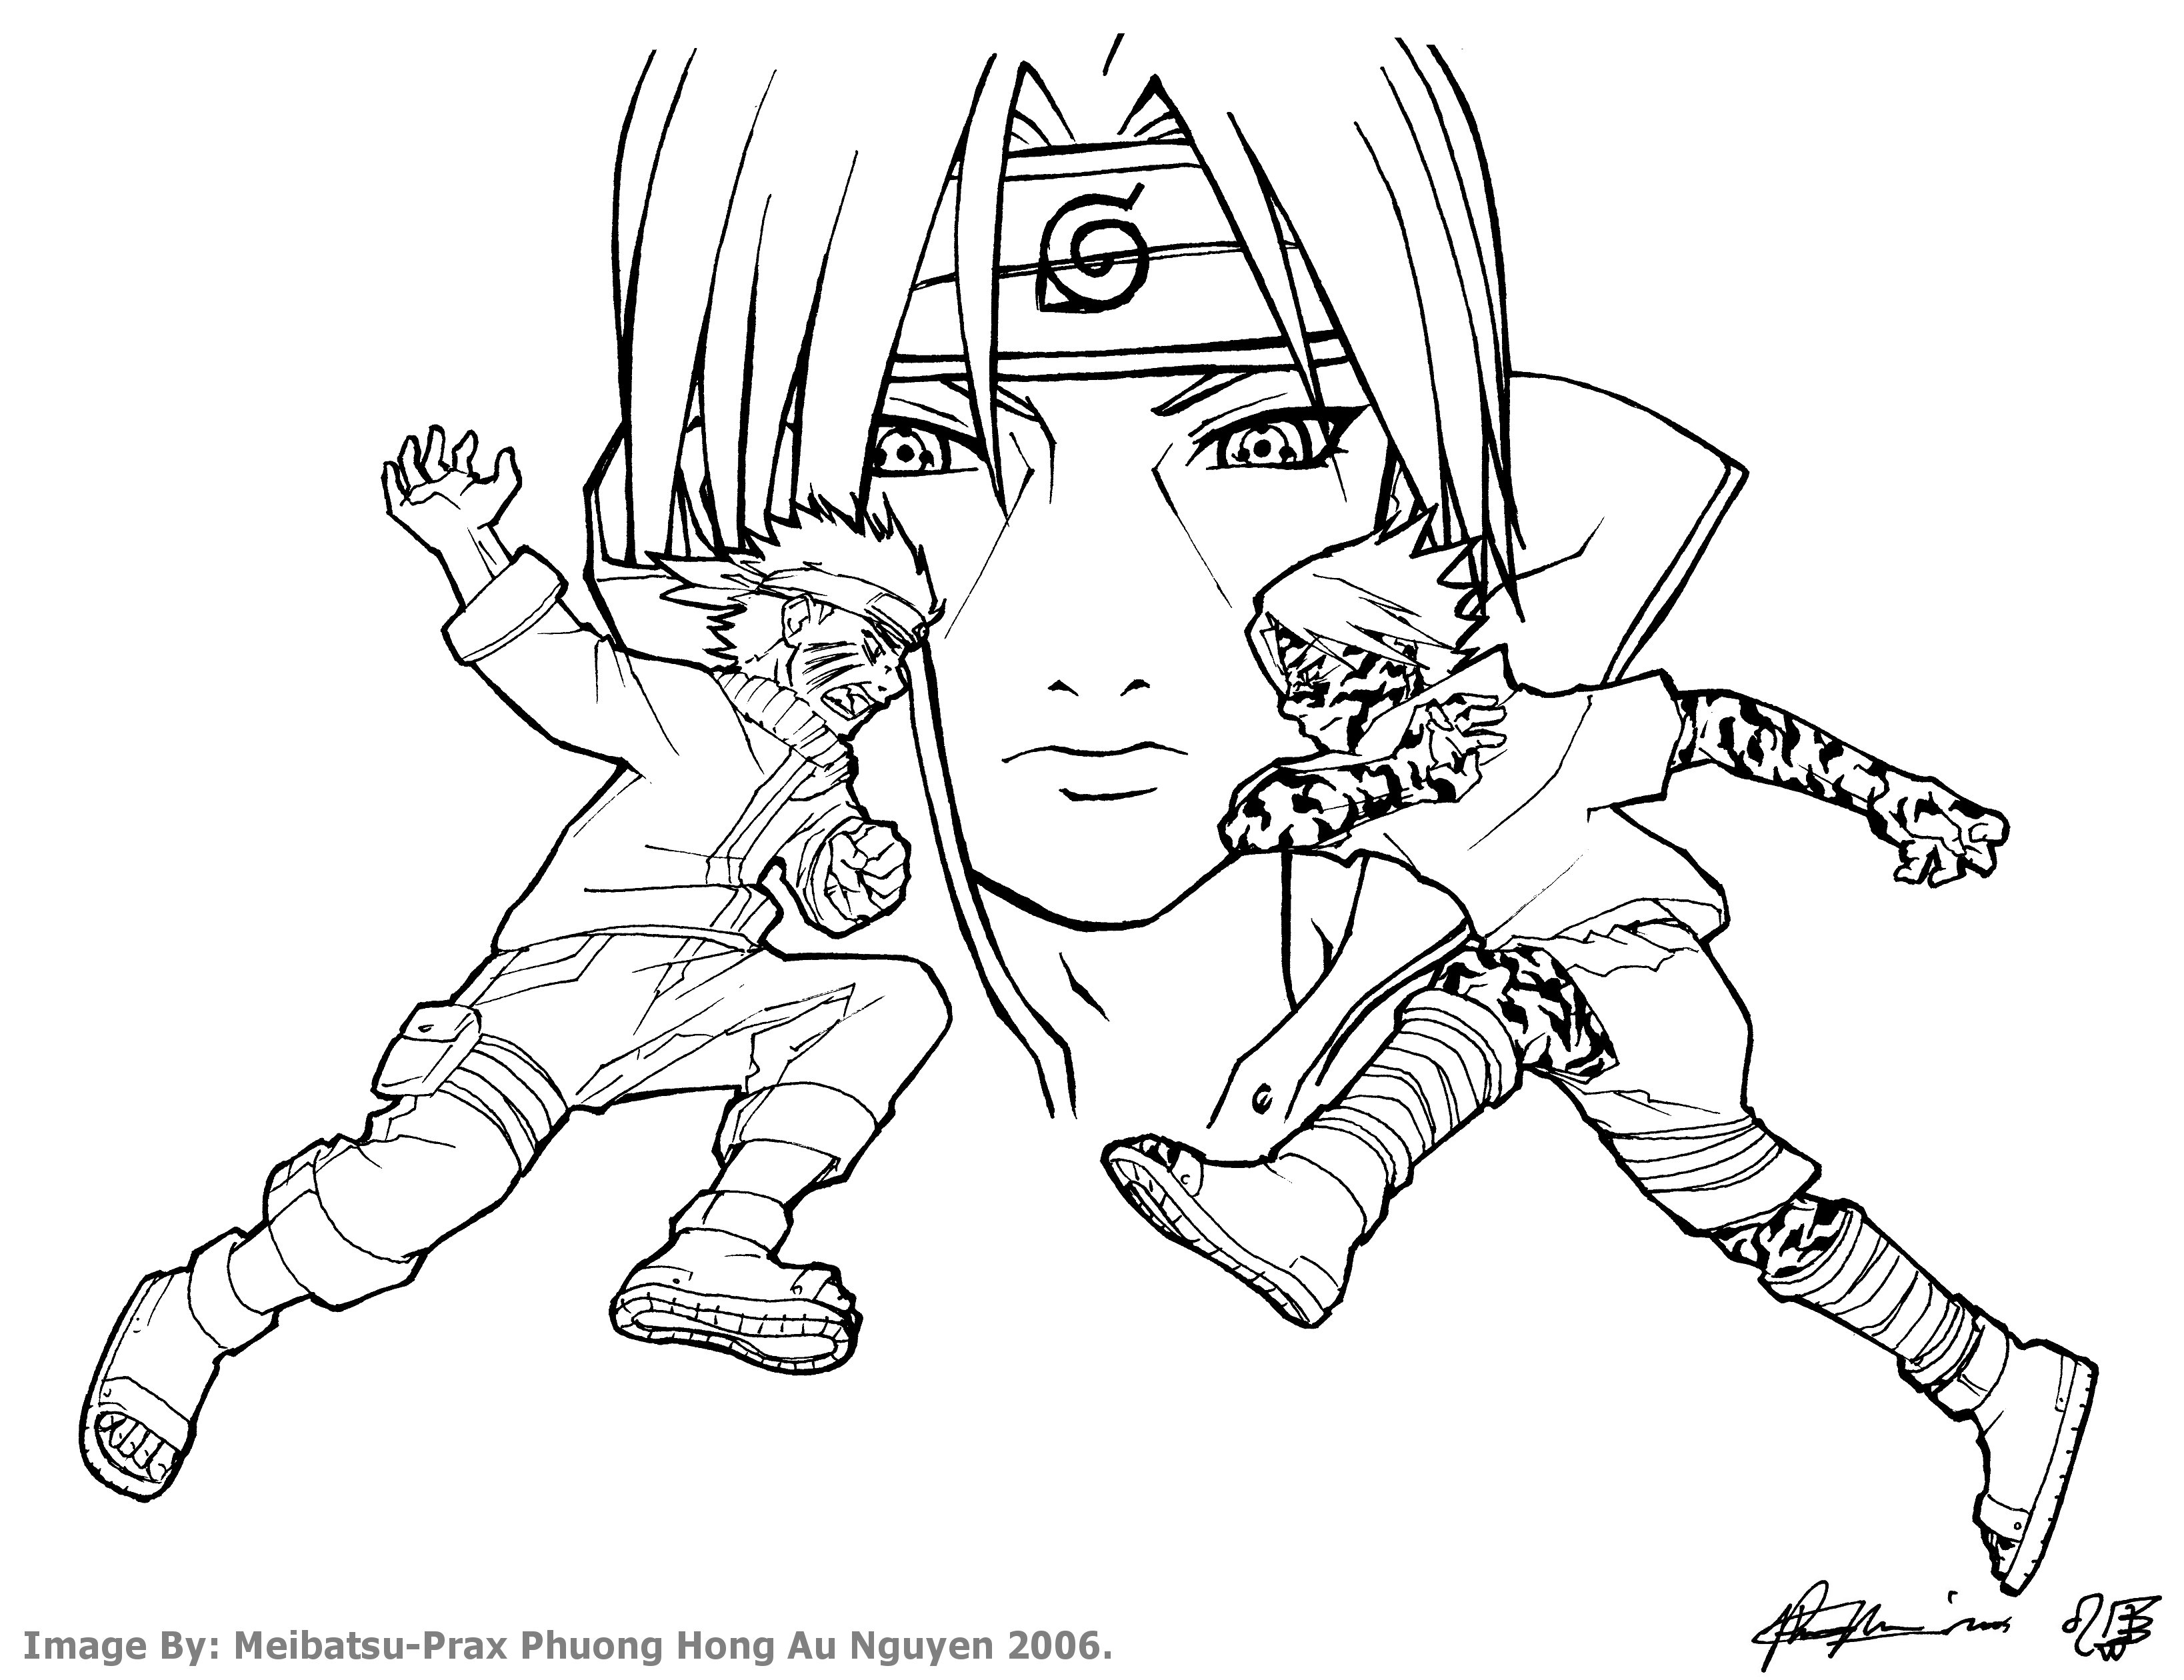 460  Coloring Pages Of Naruto And Sasuke  Best Free